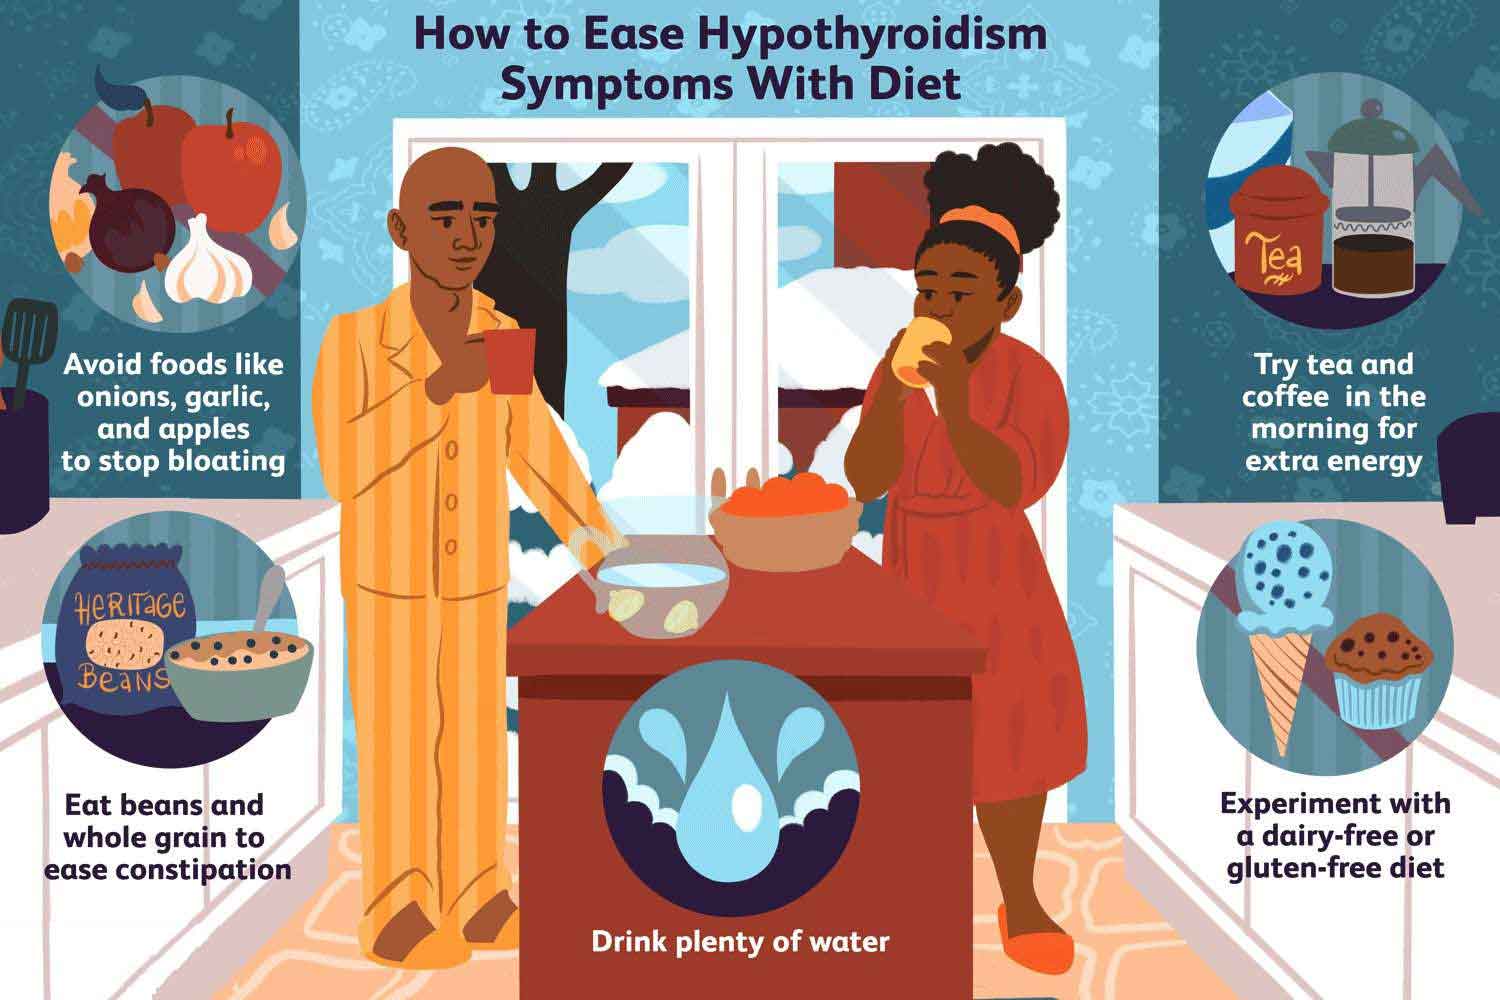 How to Ease Hypothyroidism Symptoms with Diet